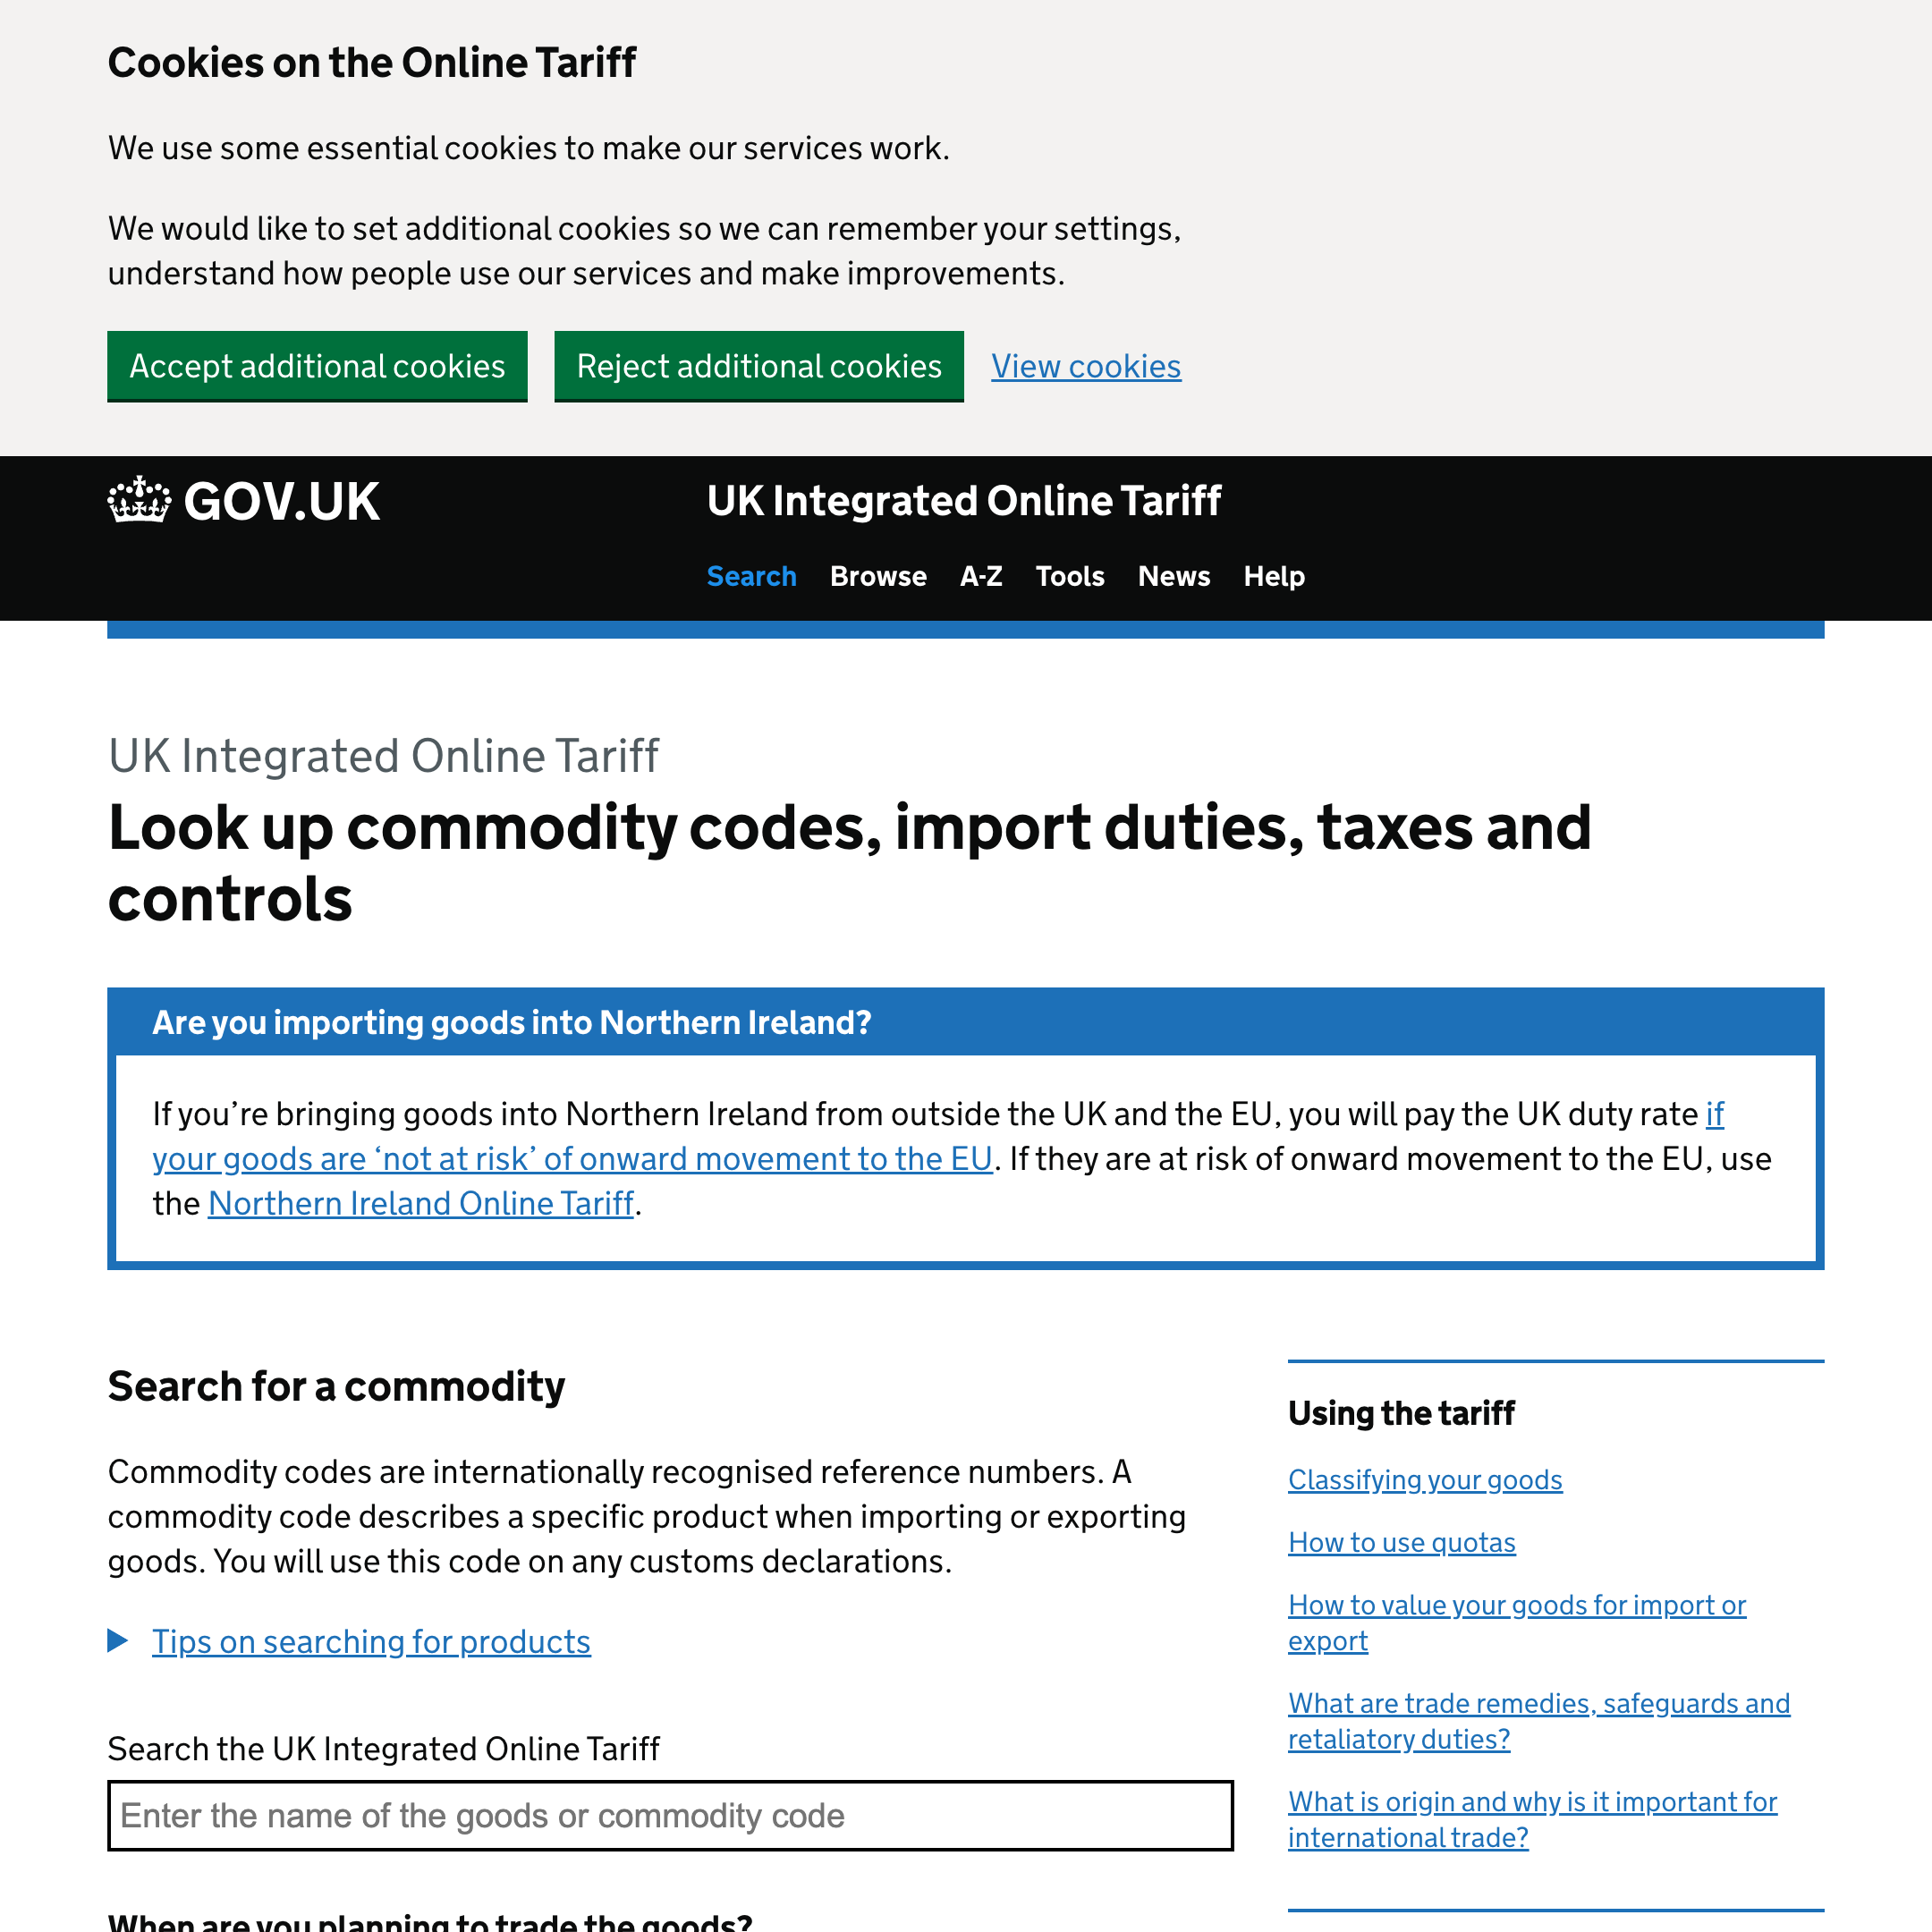 Look up commodity codes, import duties, taxes and controls (UK Integrated Online Tariff)